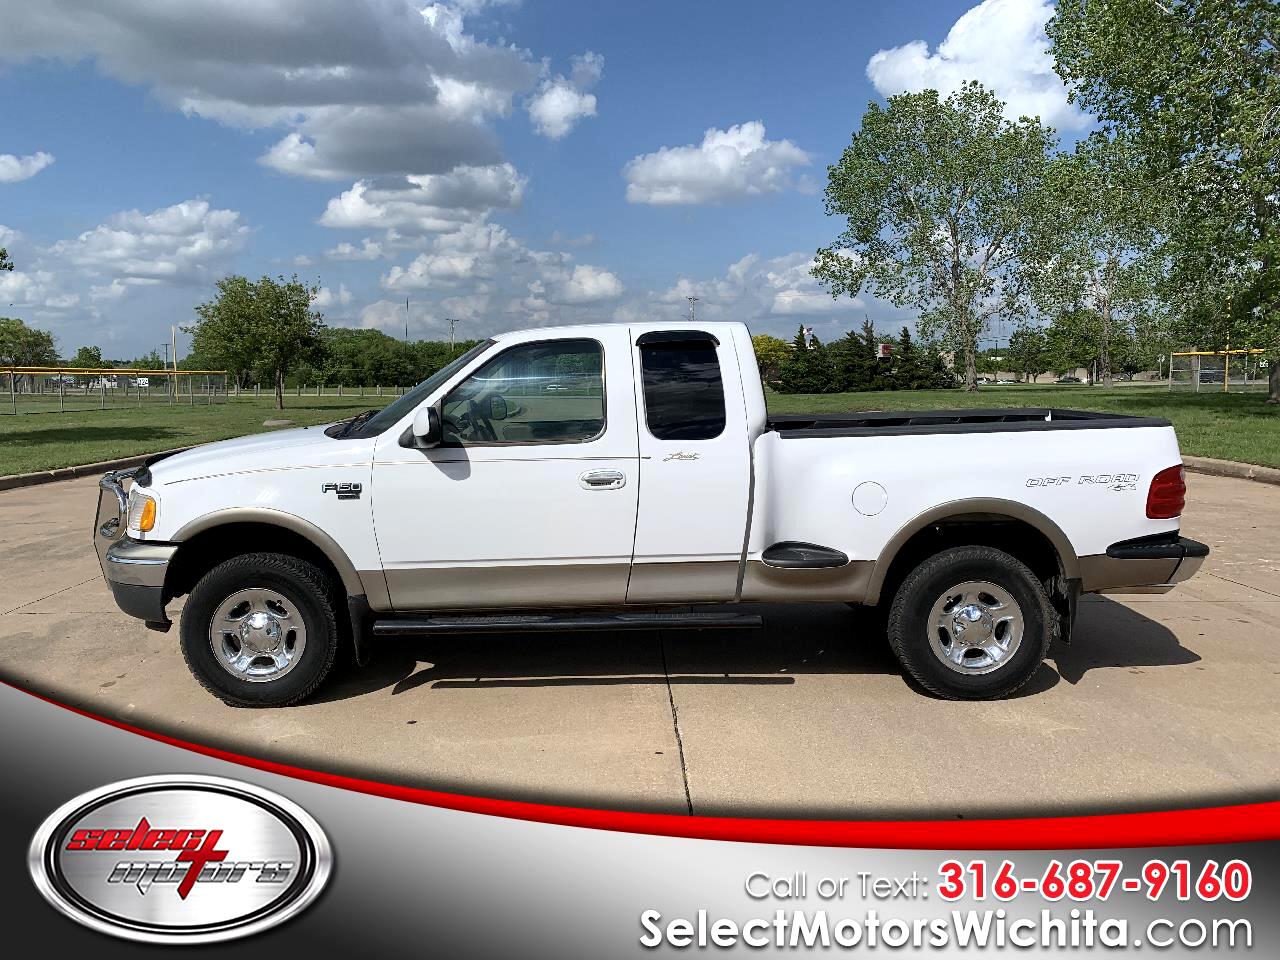 Used 2001 Ford F-150 Supercab Flareside 139" Lariat 4WD for Sale in 2001 Ford F150 4.6 Towing Capacity